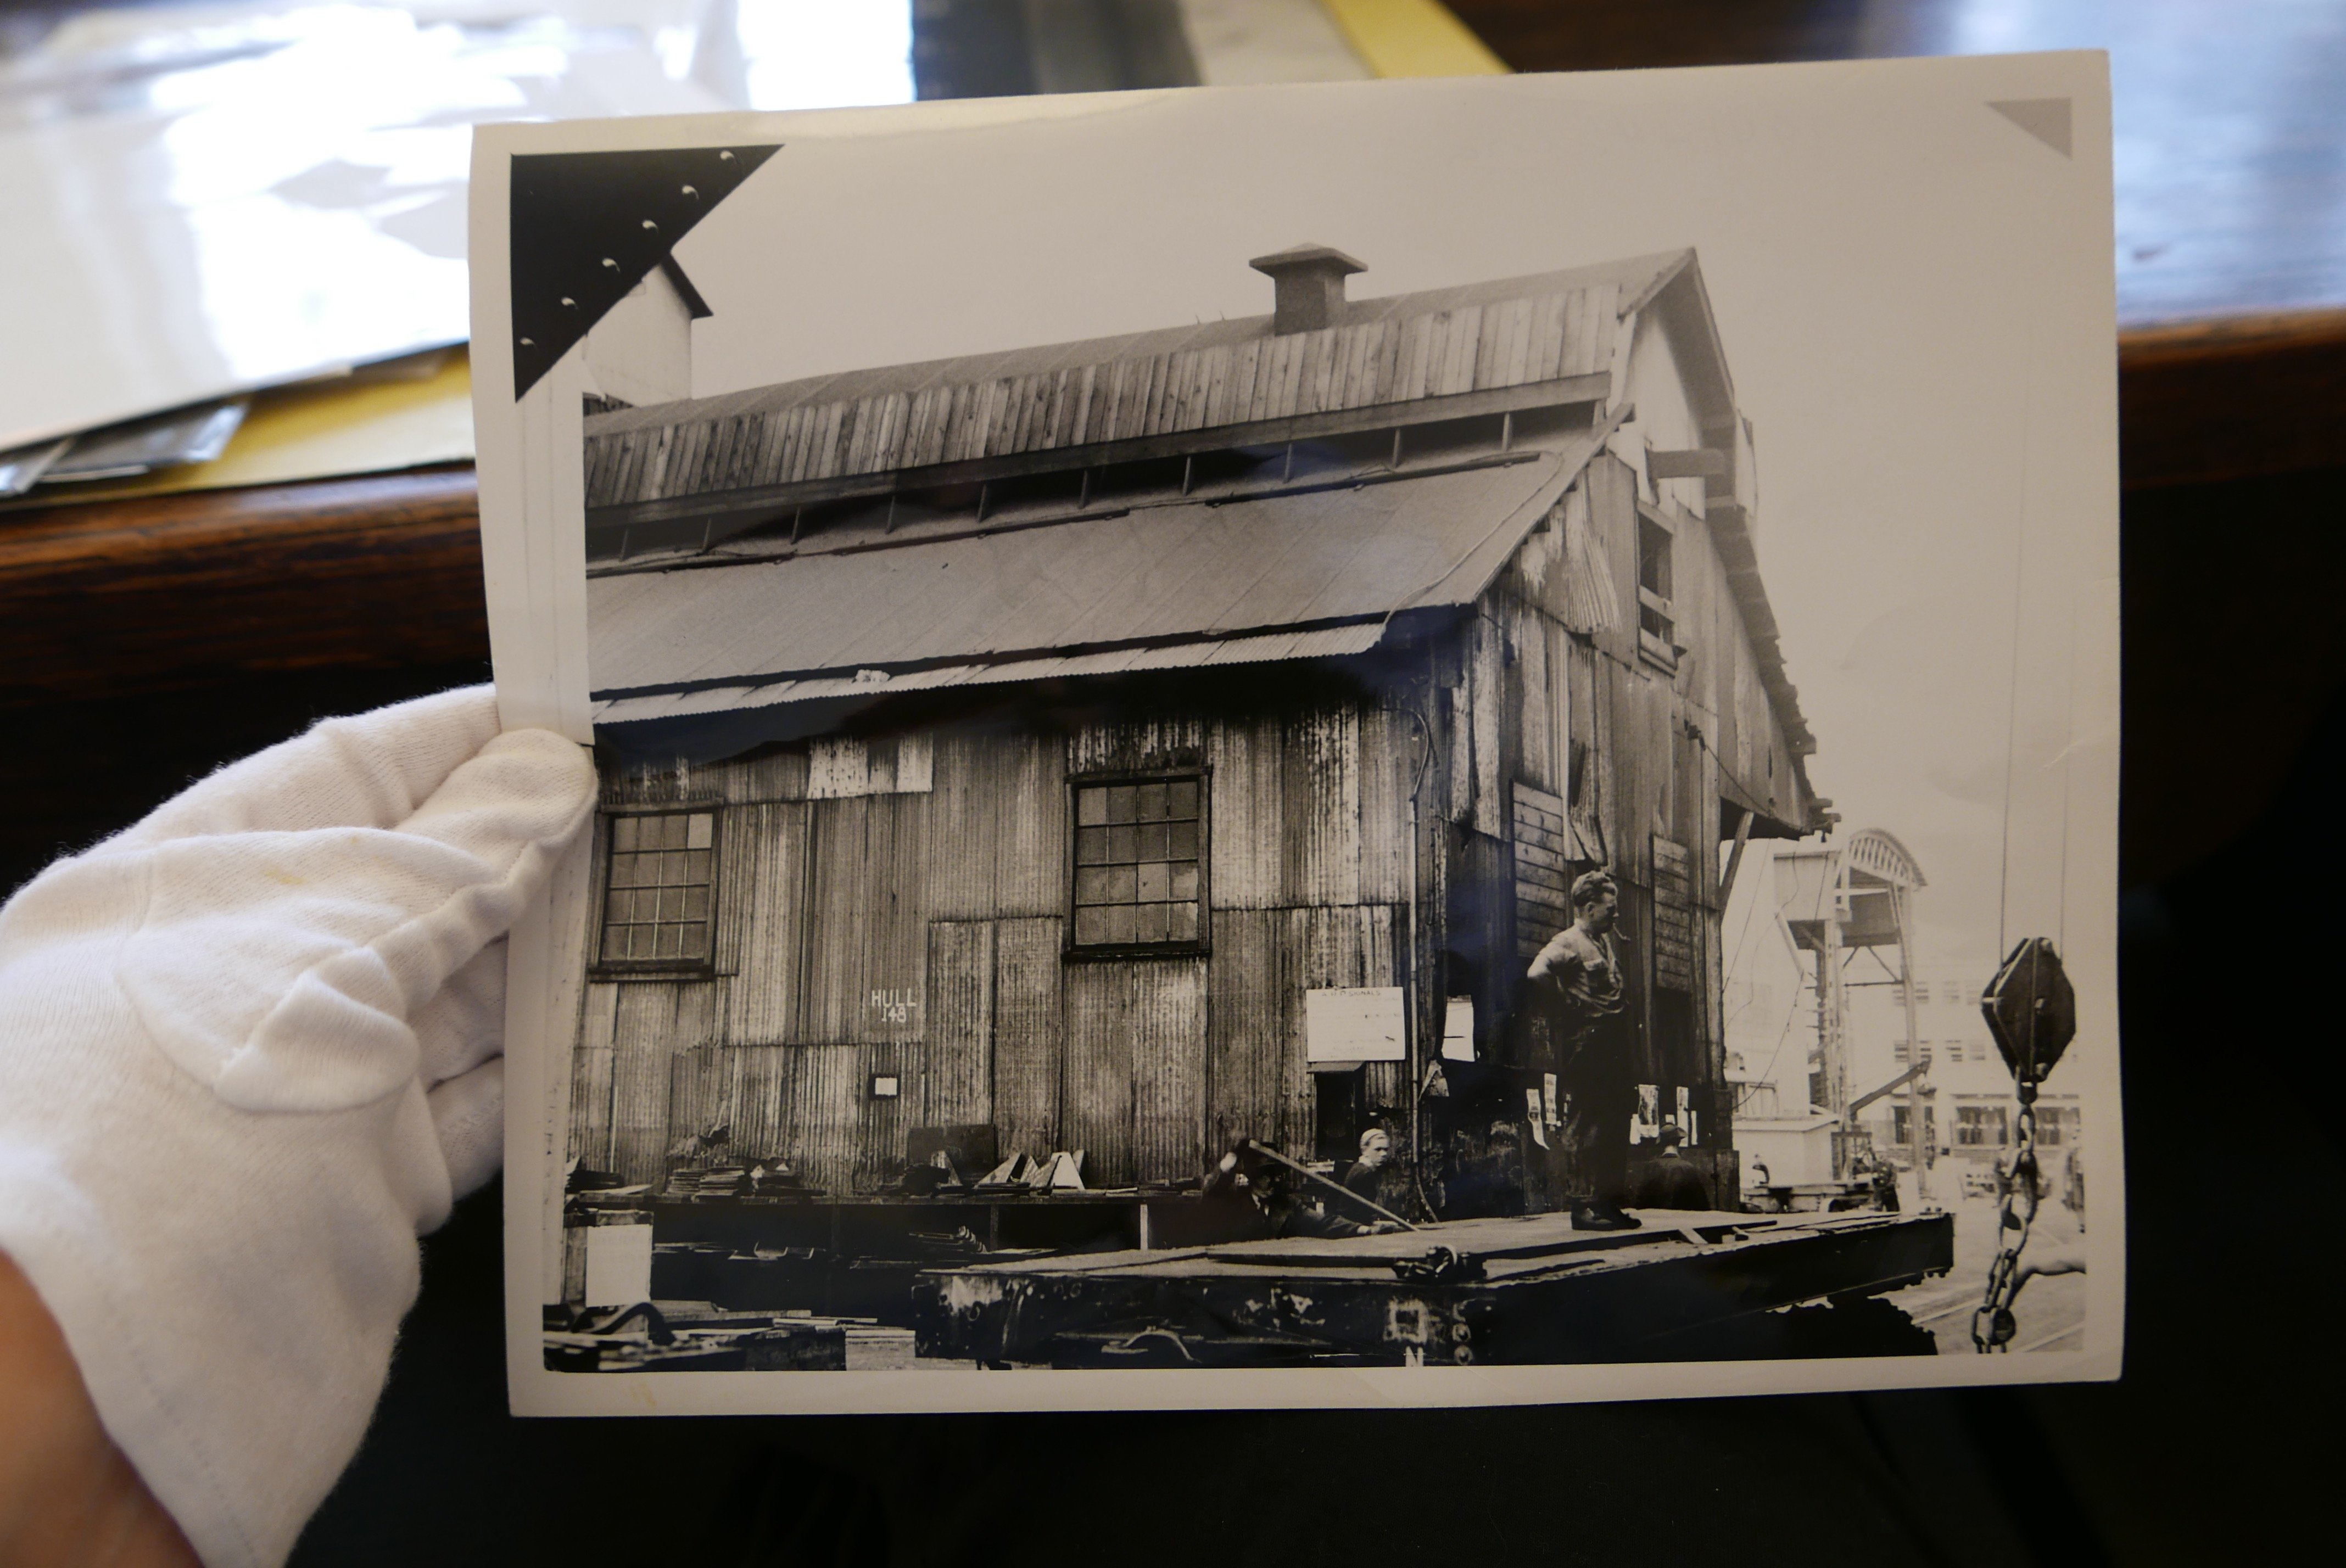 Photograph from Burrard Drydock collection at North Vancouver Museum and Archives